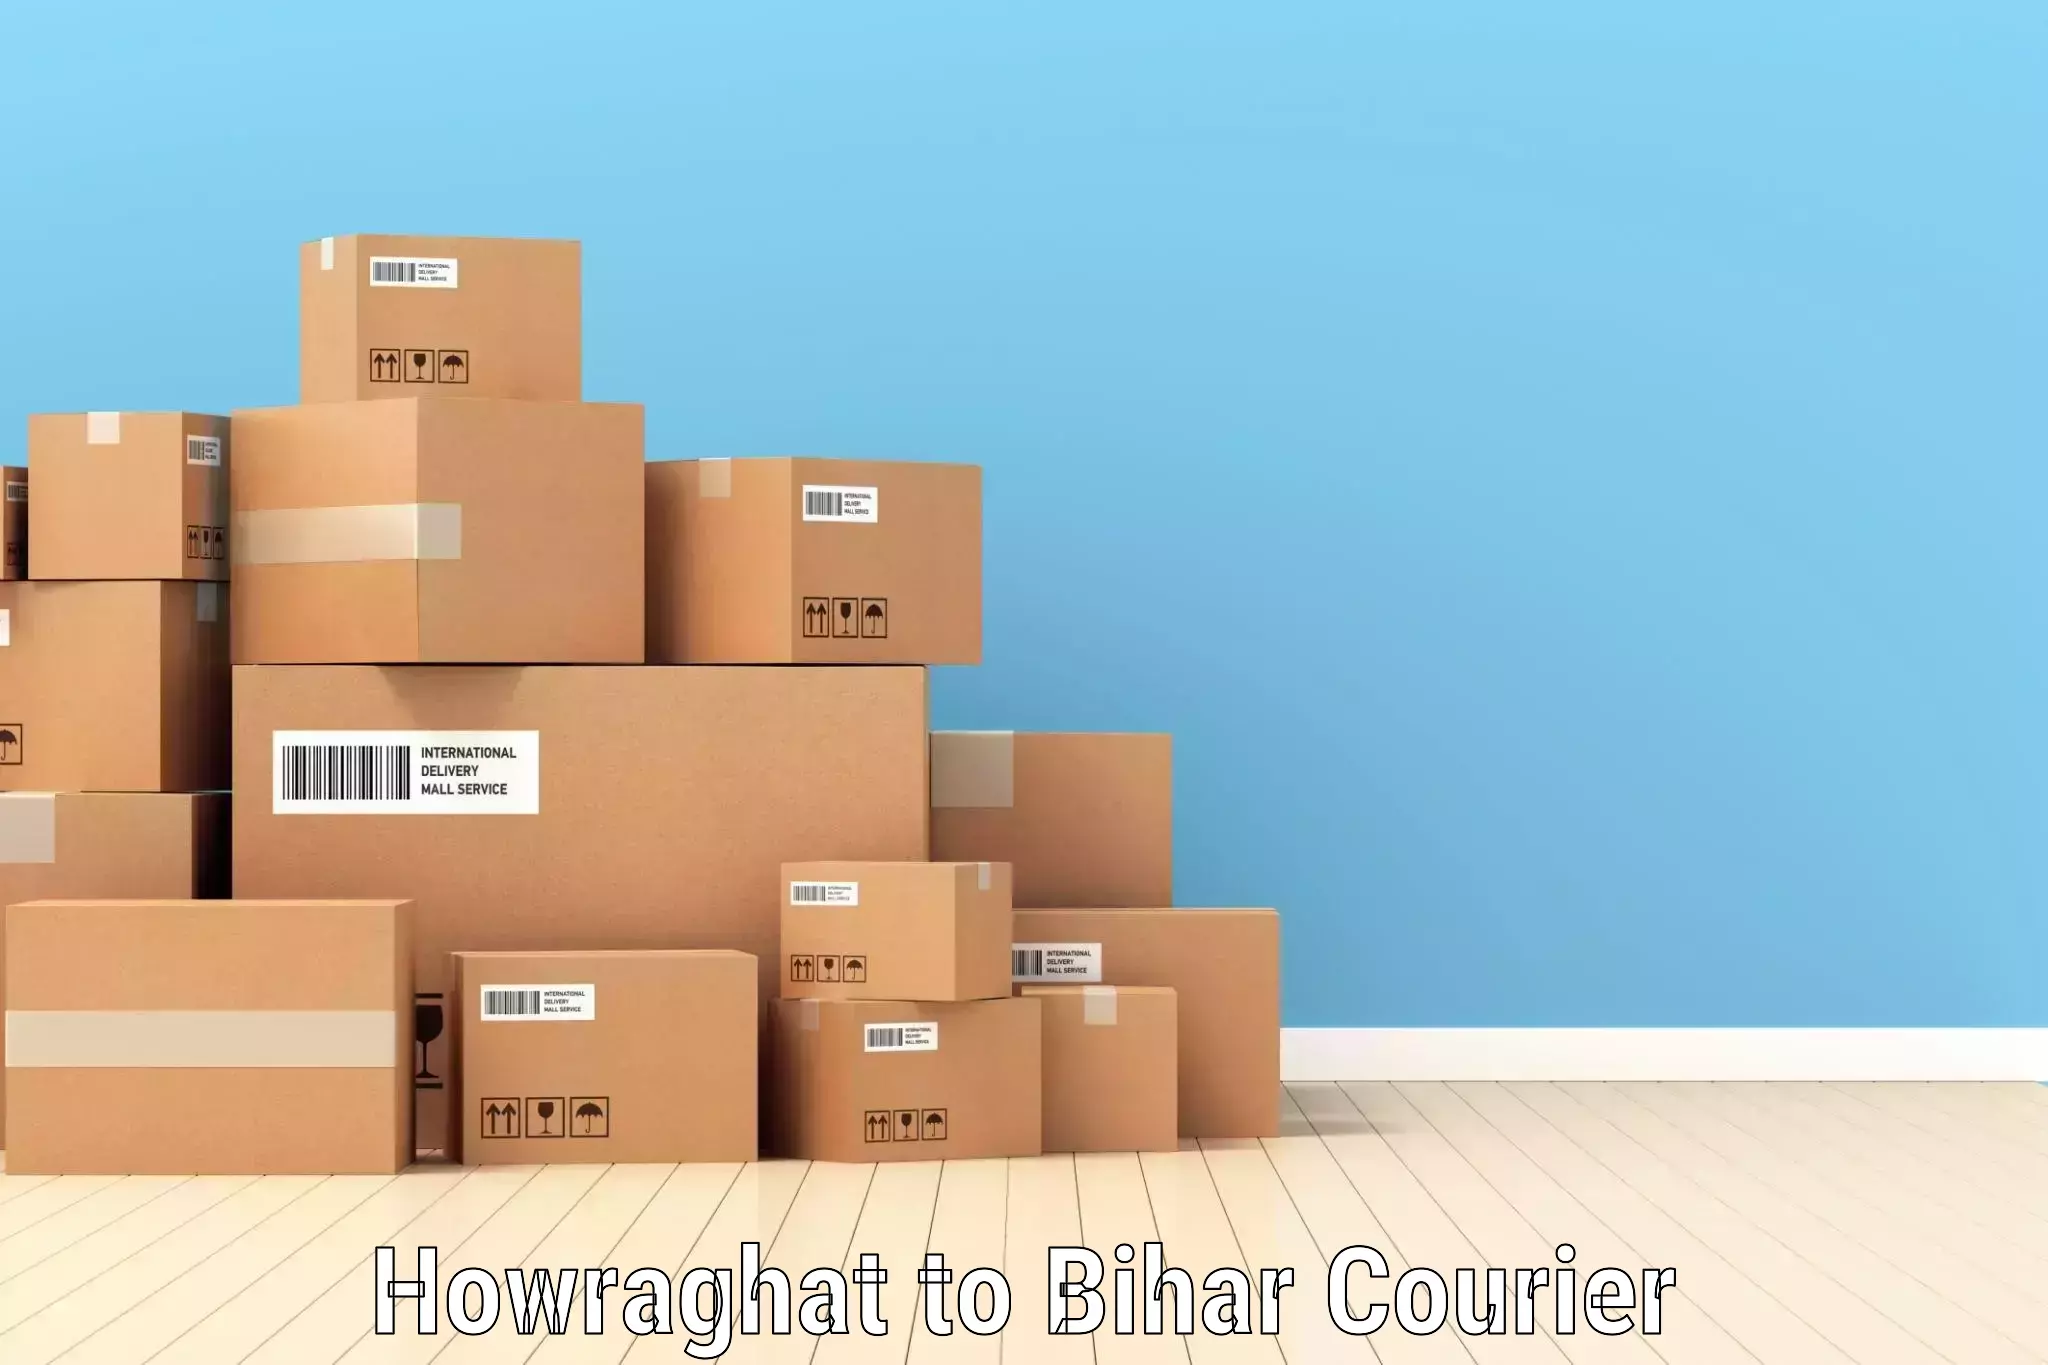 State-of-the-art courier technology Howraghat to Lalganj Vaishali